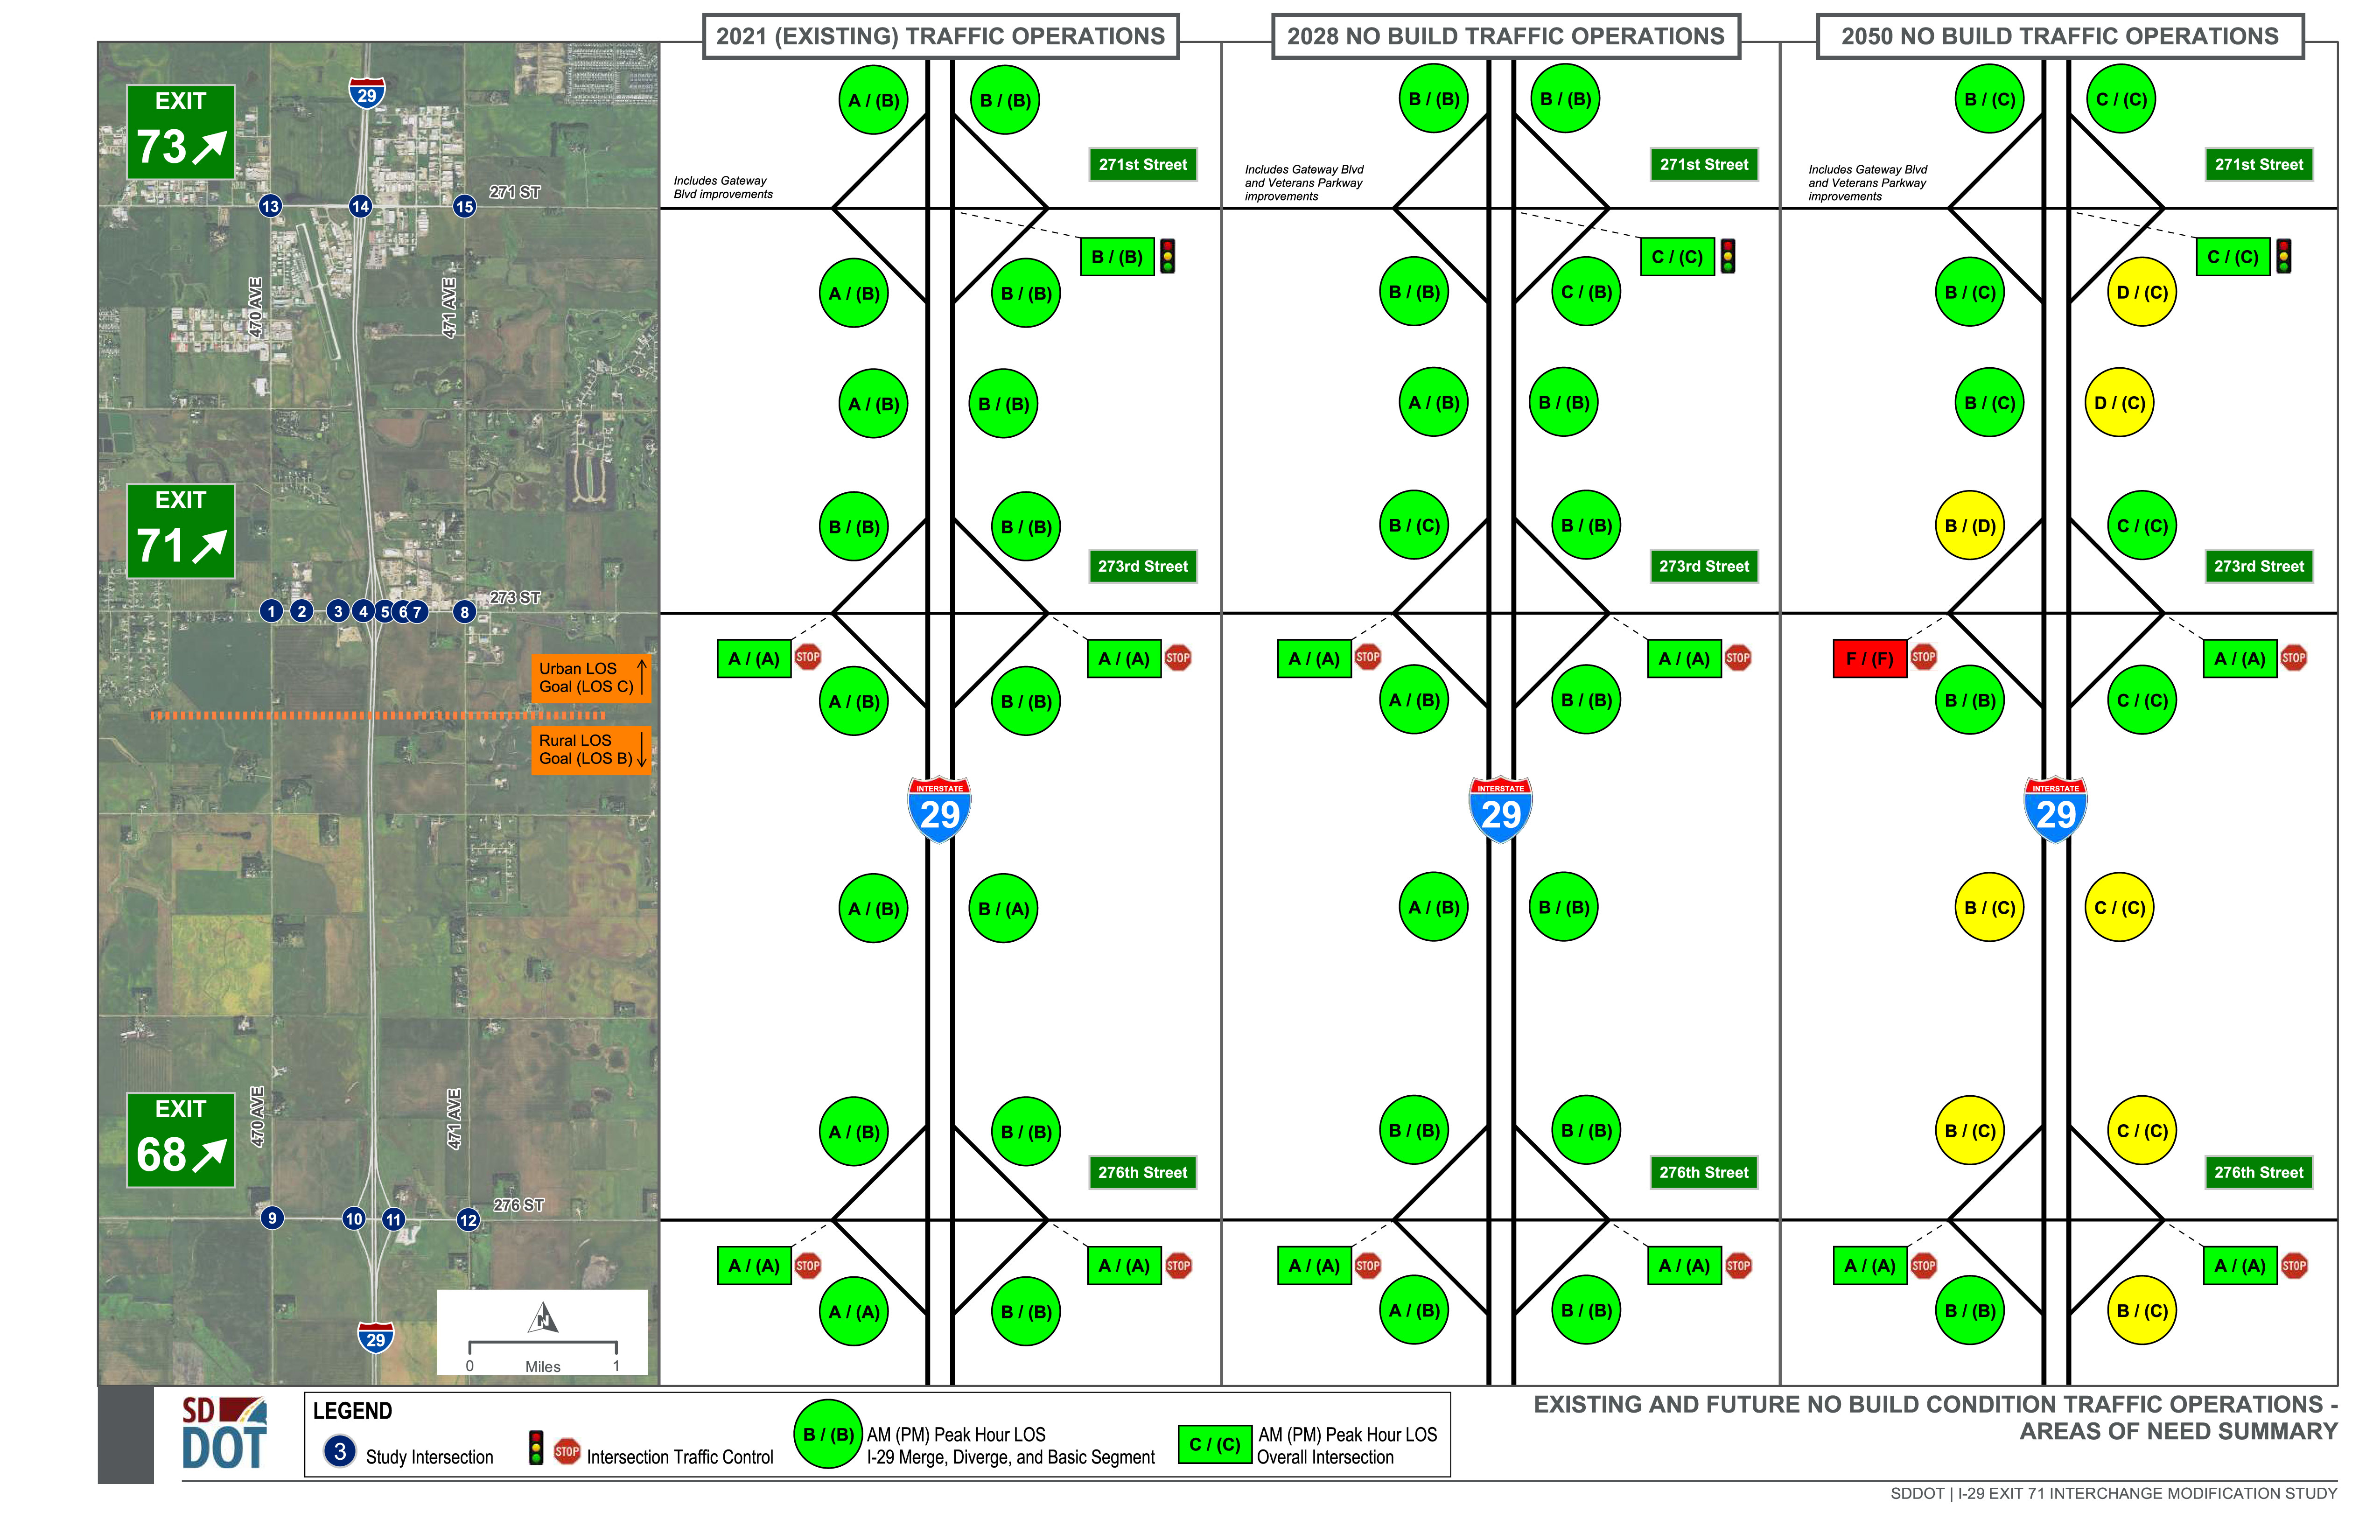 The Traffic Operation Analysis graphic shows morning and afternoon (AM and PM) Level of Service (LOS) measures for traffic operations along I-29 mainline and at the Exit 68, 71, and 73 interchanges.  Operational measures include freeway operations, interchange ramp merge and diverge operations, and ramp terminal intersections.  LOS was determined for existing traffic volumes and forecasted 2028 and 2050 traffic volumes.  